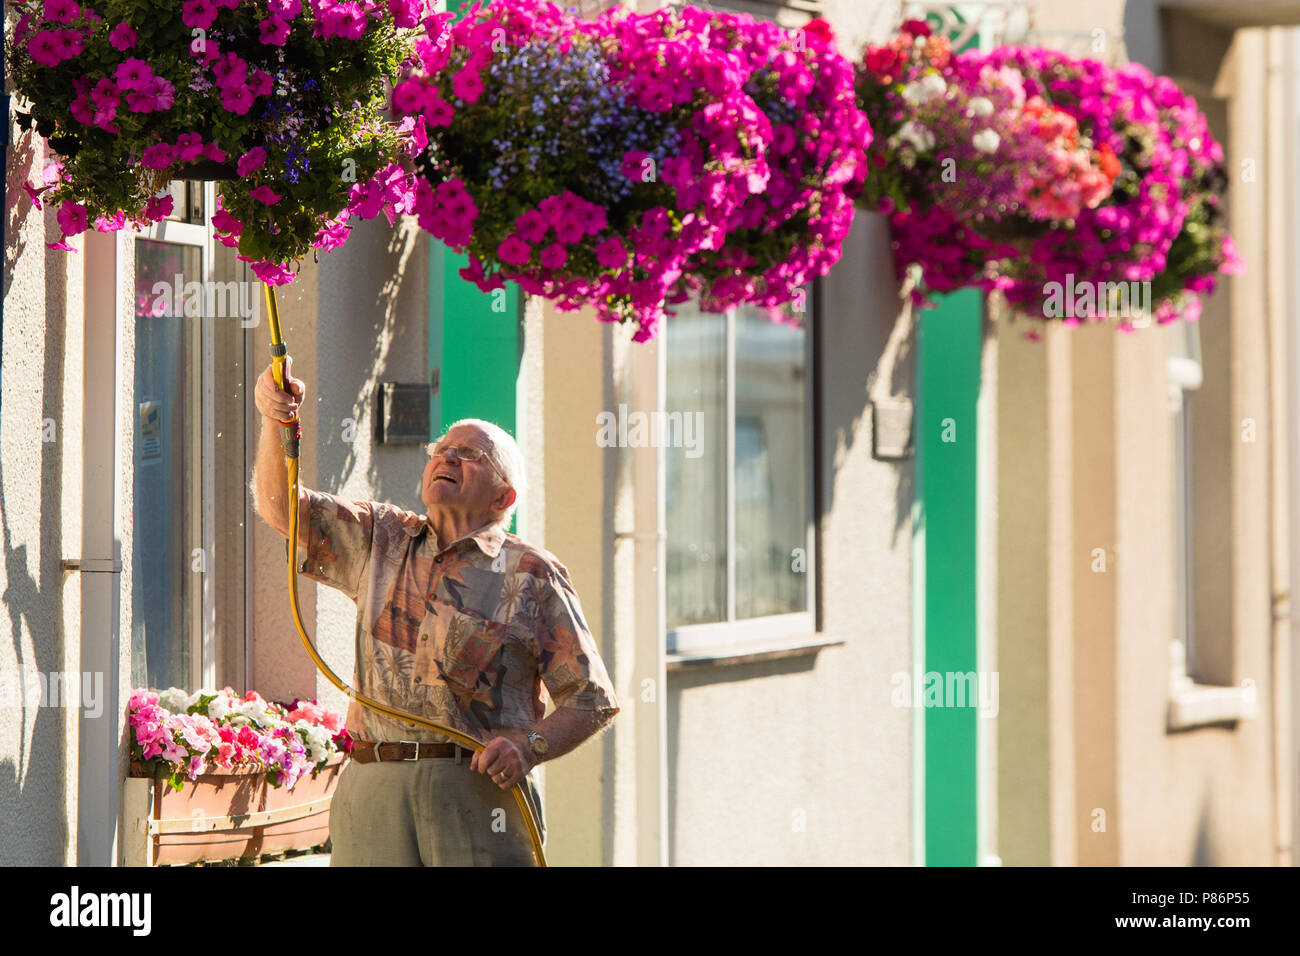 Aberystwyth Wales UK Tuesday 10 July 2018. UK Weather:  A man uses a hosepipe to water the hanging baskets outside his home in Aberystwyth Wales, on yet another hot and sunny morning. The long spell of dry weather continues with  no sign of significant rain in the forecast. Some parts of the UK are experiencing almost drought conditions, with low water levels in many rivers and reservoirs. Hosepipe bans are already in place in Northern Ireland. Photo credit: Keith Morris / Alamy Live News Stock Photo